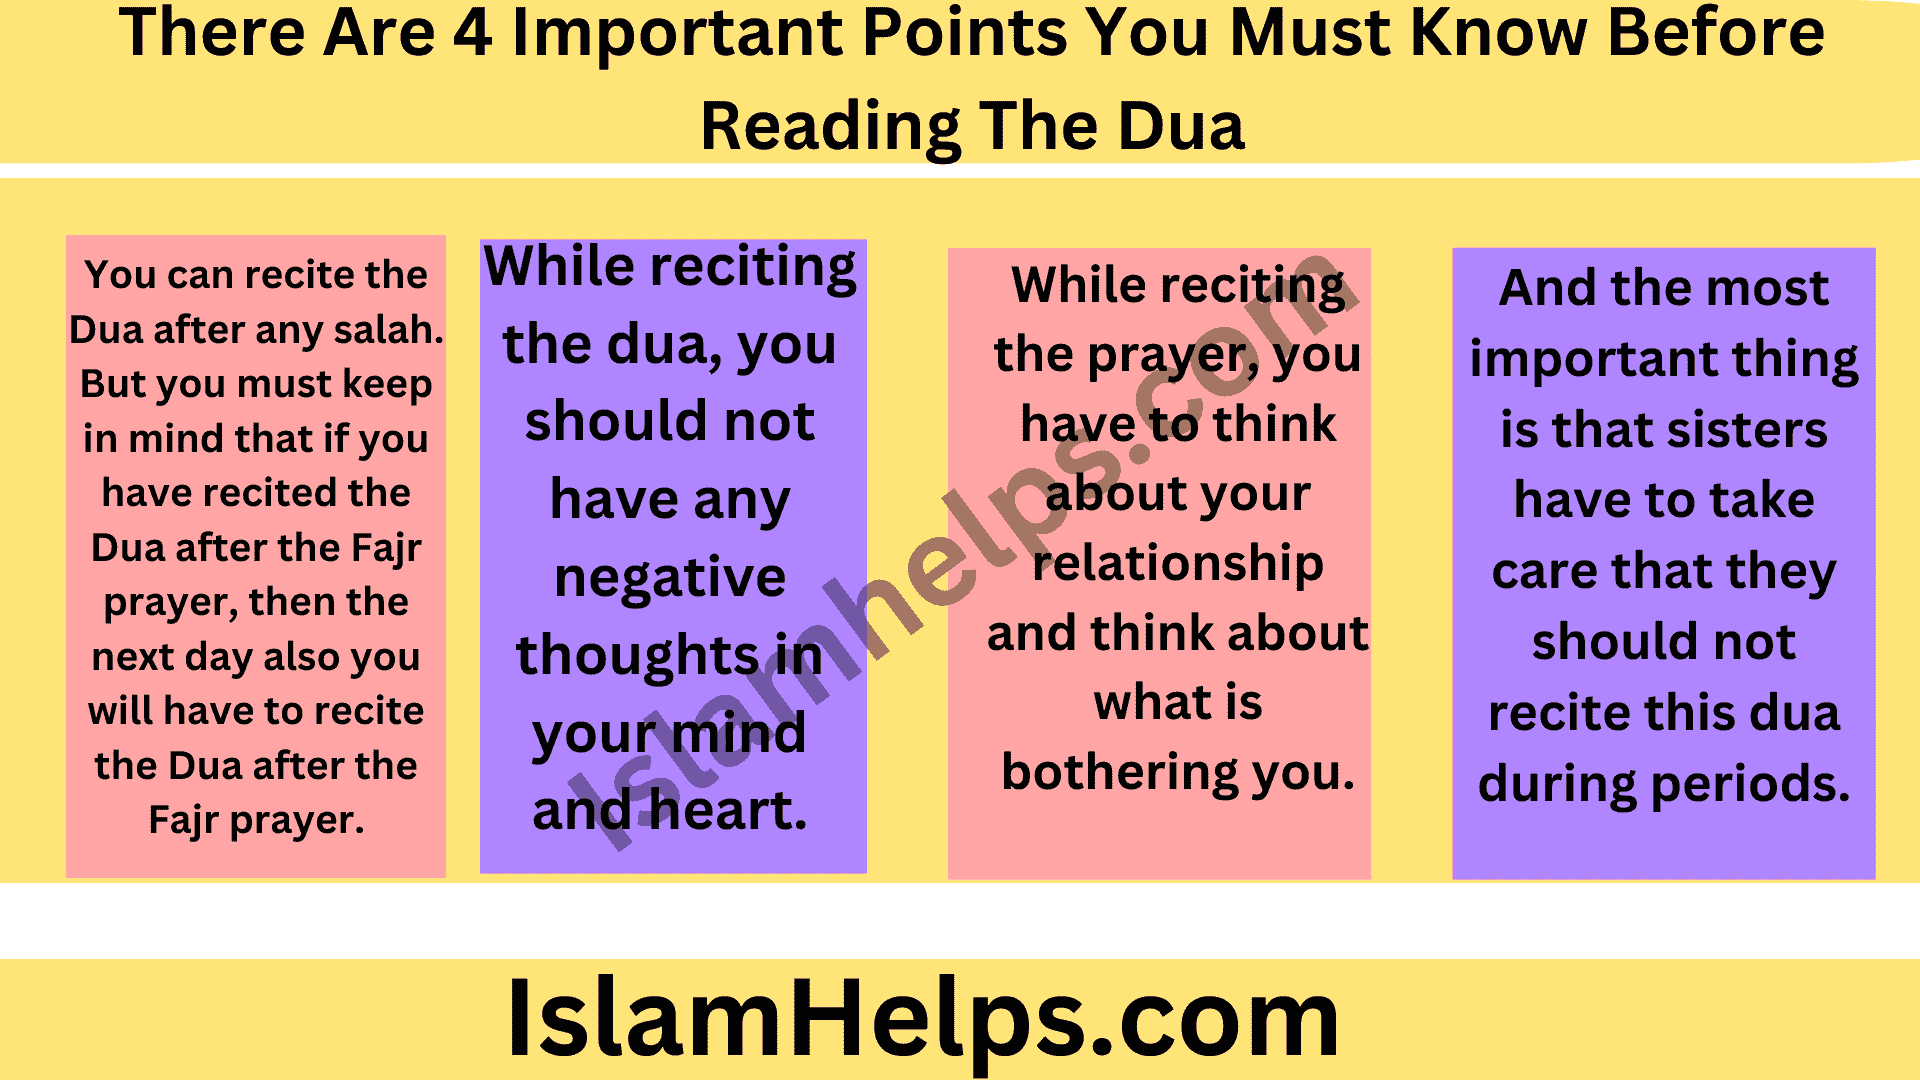 There Are 4 Important Points You Must Know Before Reading The Dua